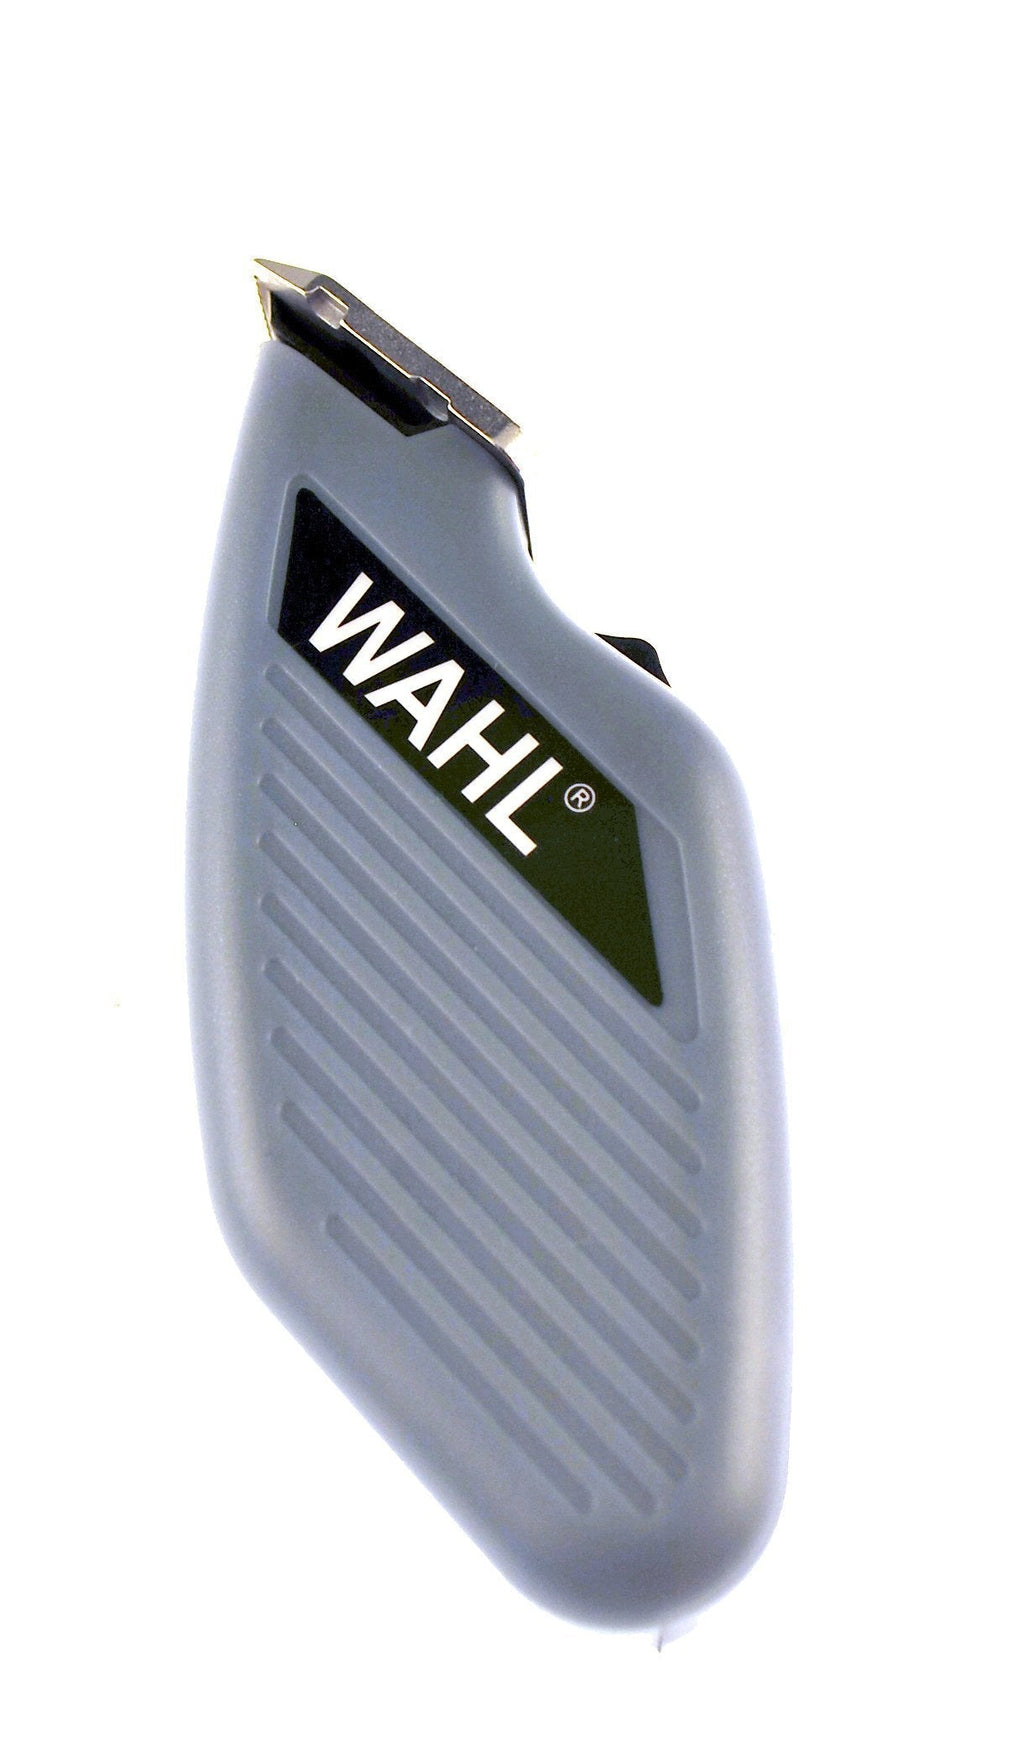 [Australia] - Wahl Pocket Pro Compact Trimmer for Touching Up Around Dogs and Cats Eyes, Ears, and Paws - Model 9961-900 Gray 